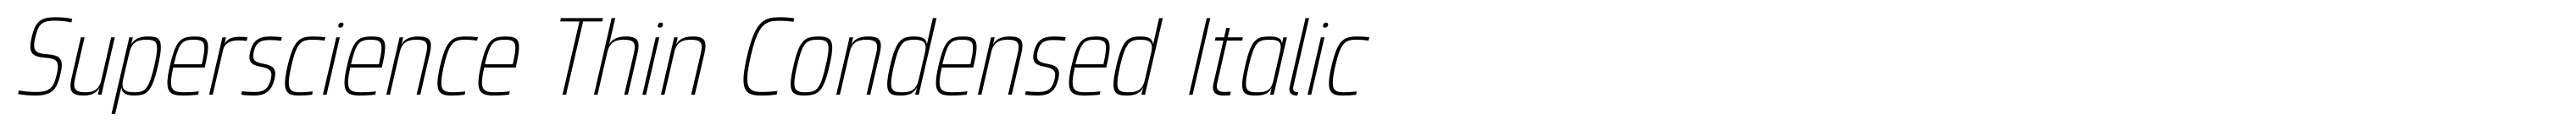 Superscience Thin Condensed Italic